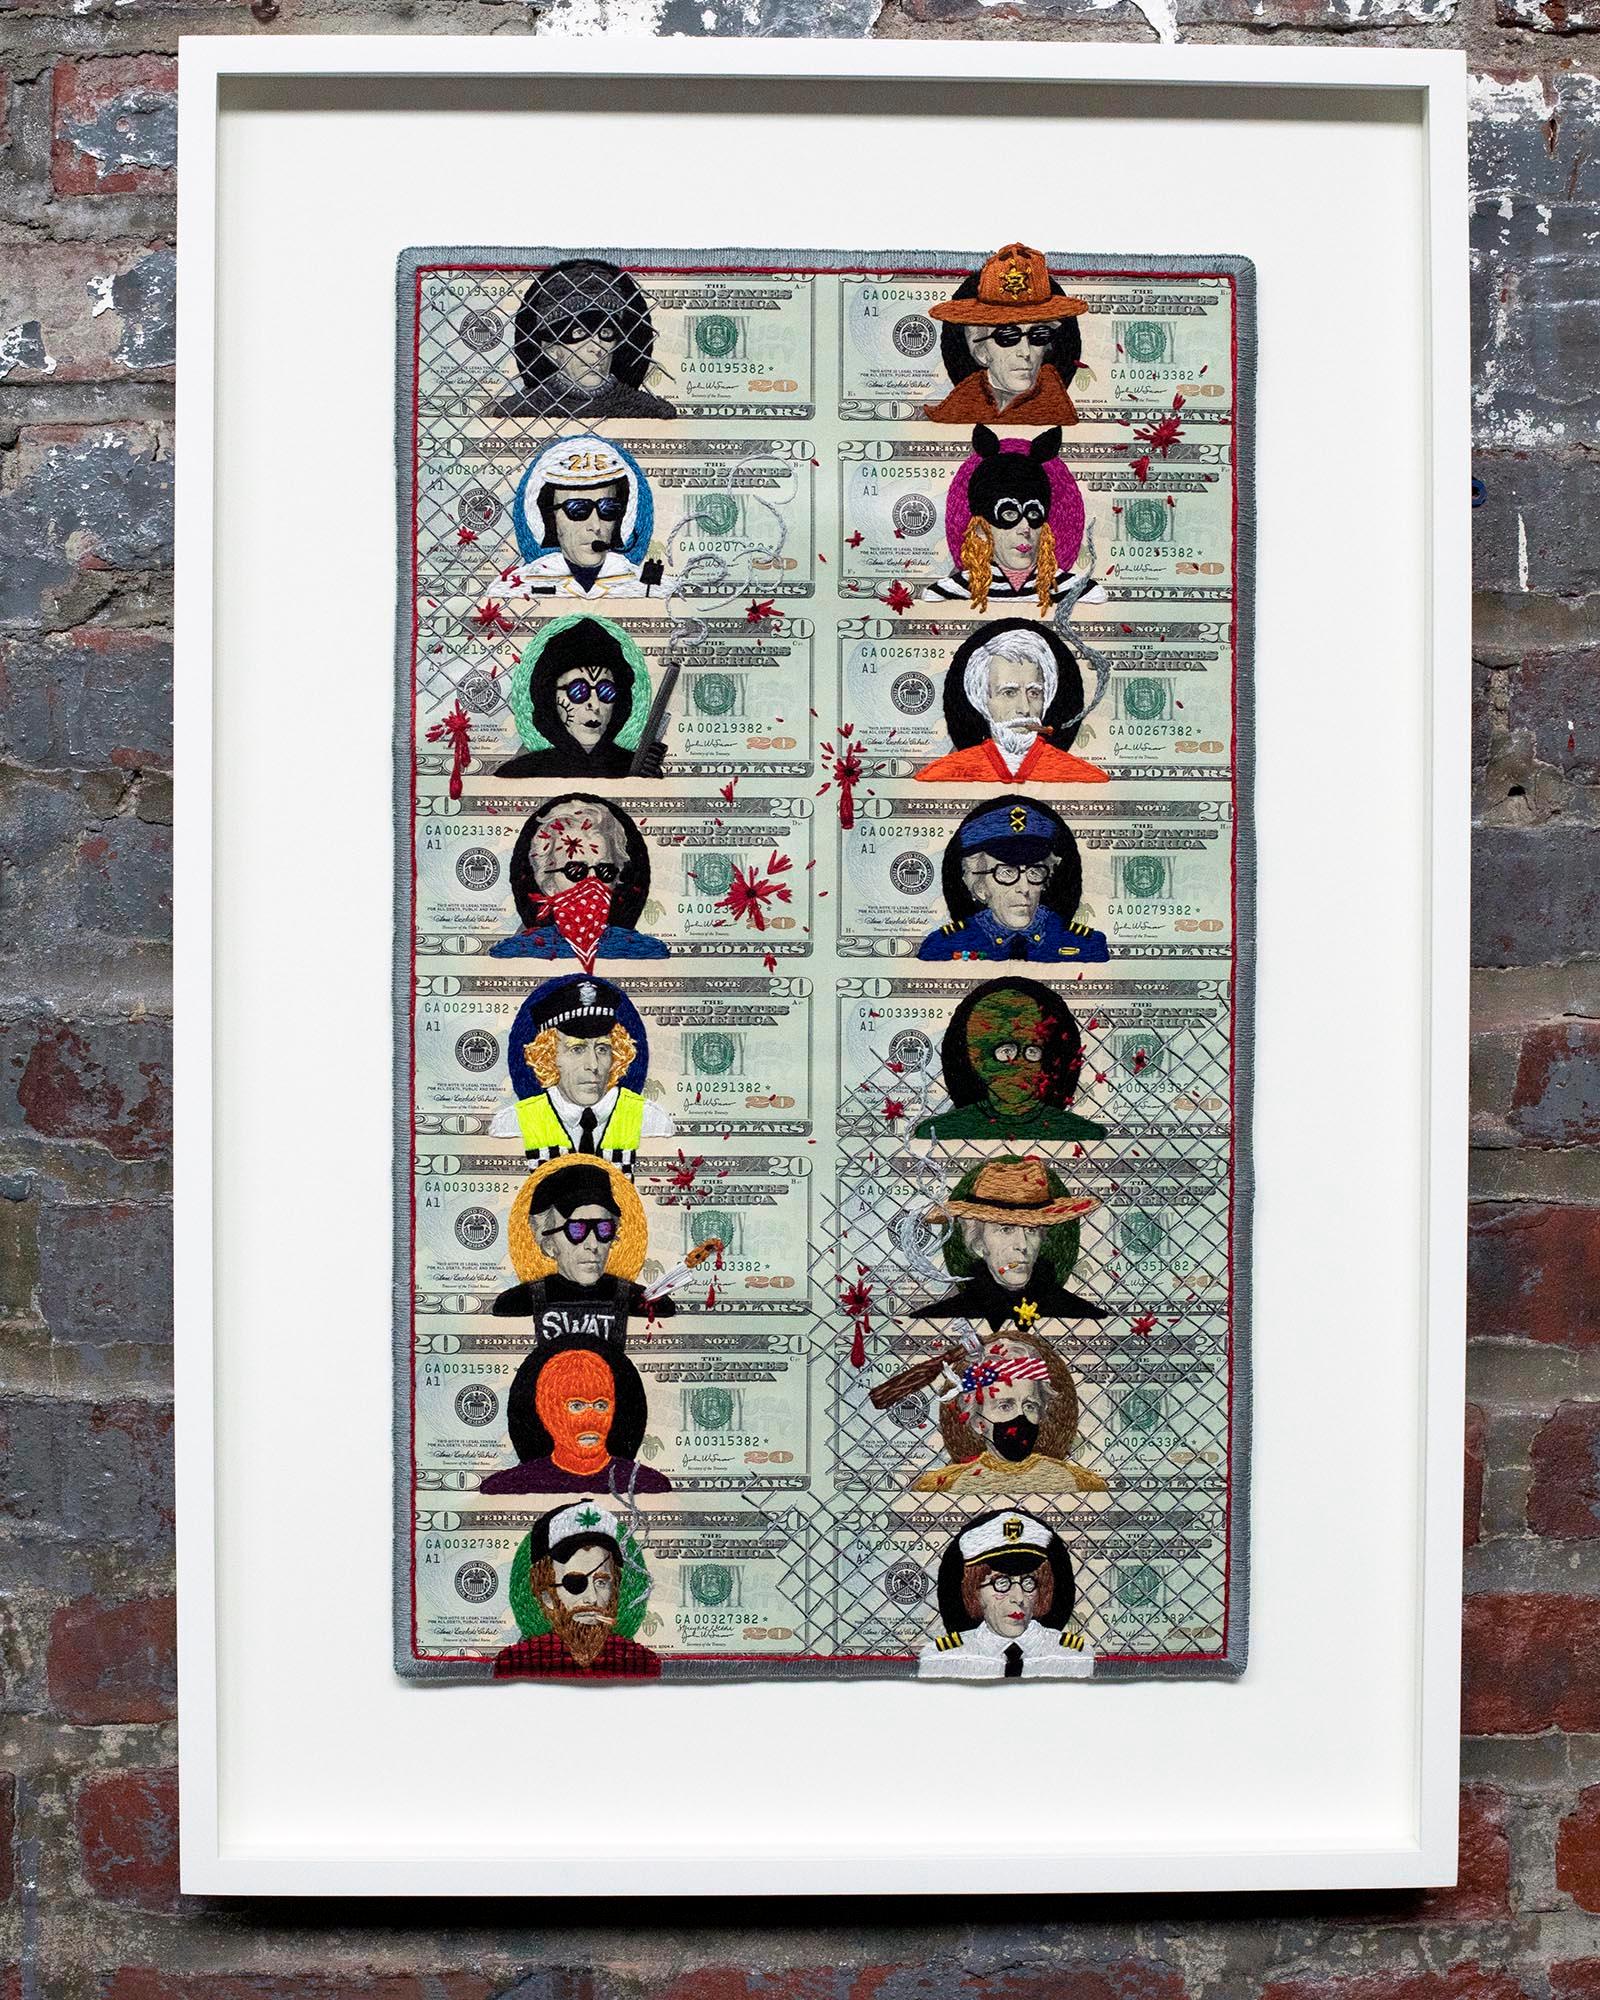 We The People: Jackson Cops & Robbers - Mixed Media Art by Stacey Lee Webber